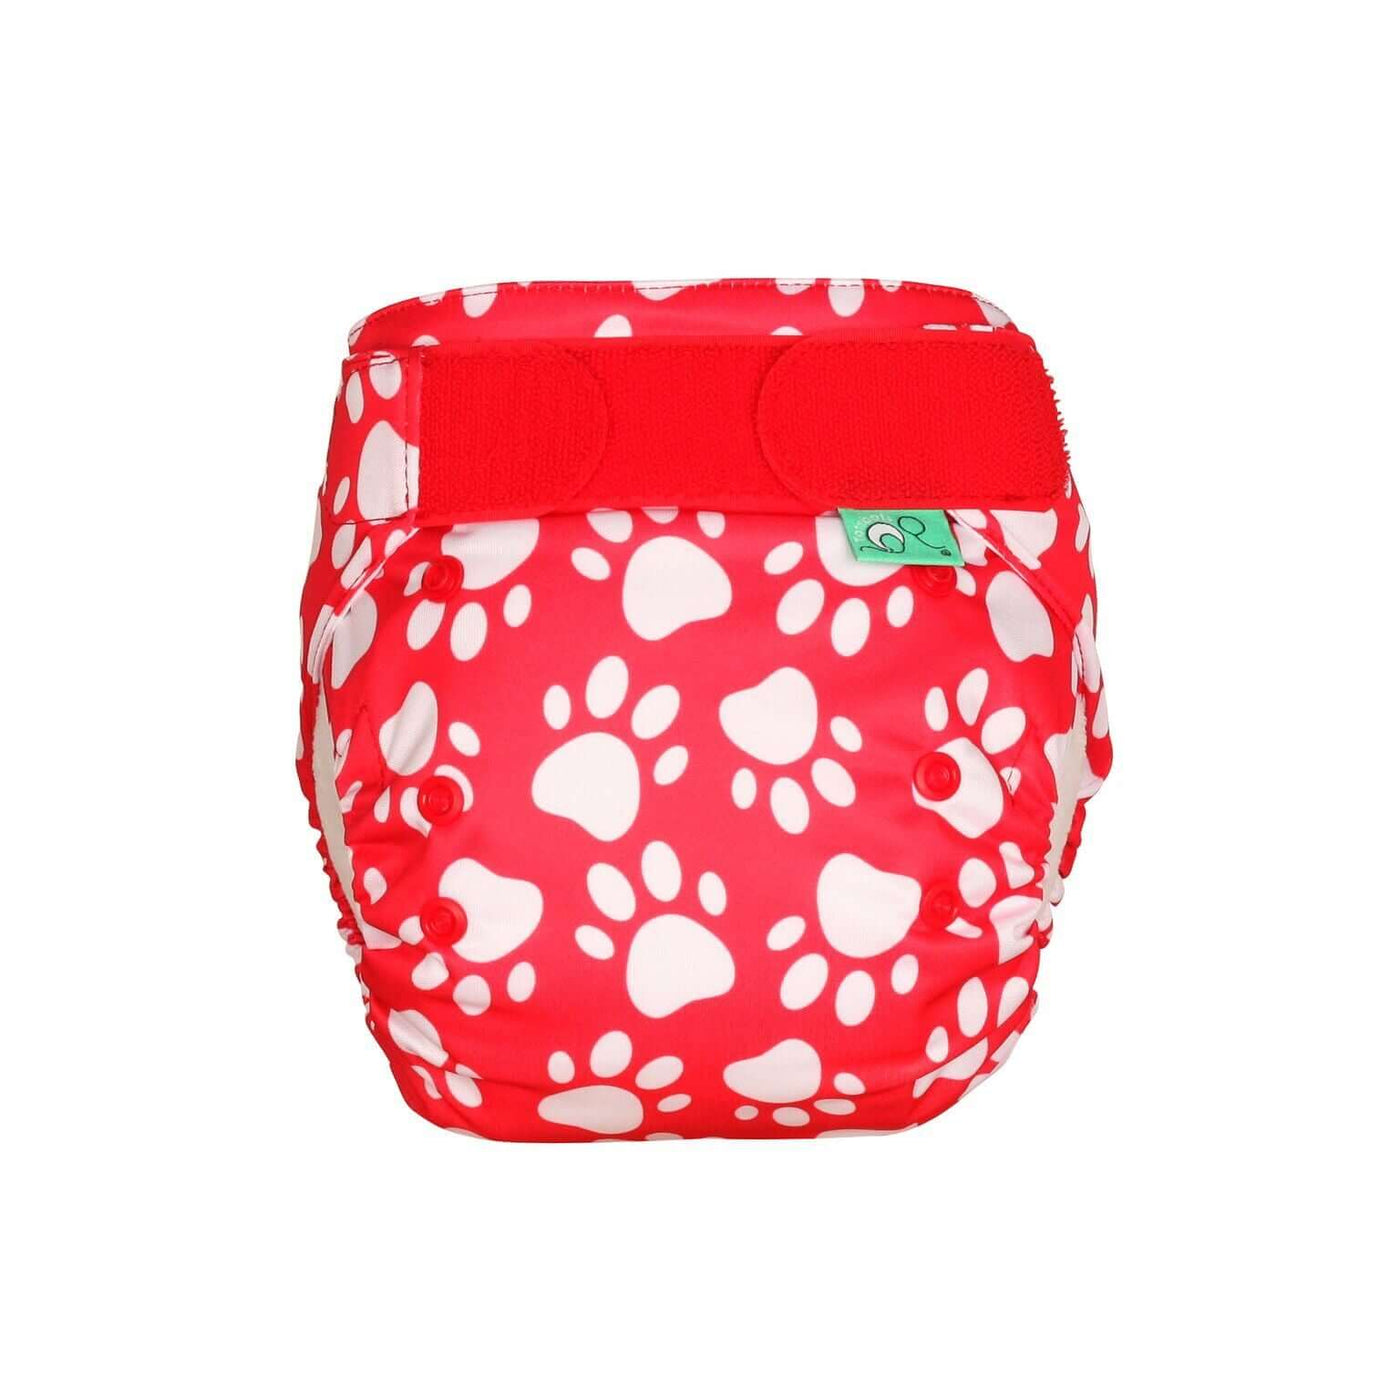 Tots Bots EasyFit Star Nappy All-in-one Colour: Pawfect reusable nappies Earthlets